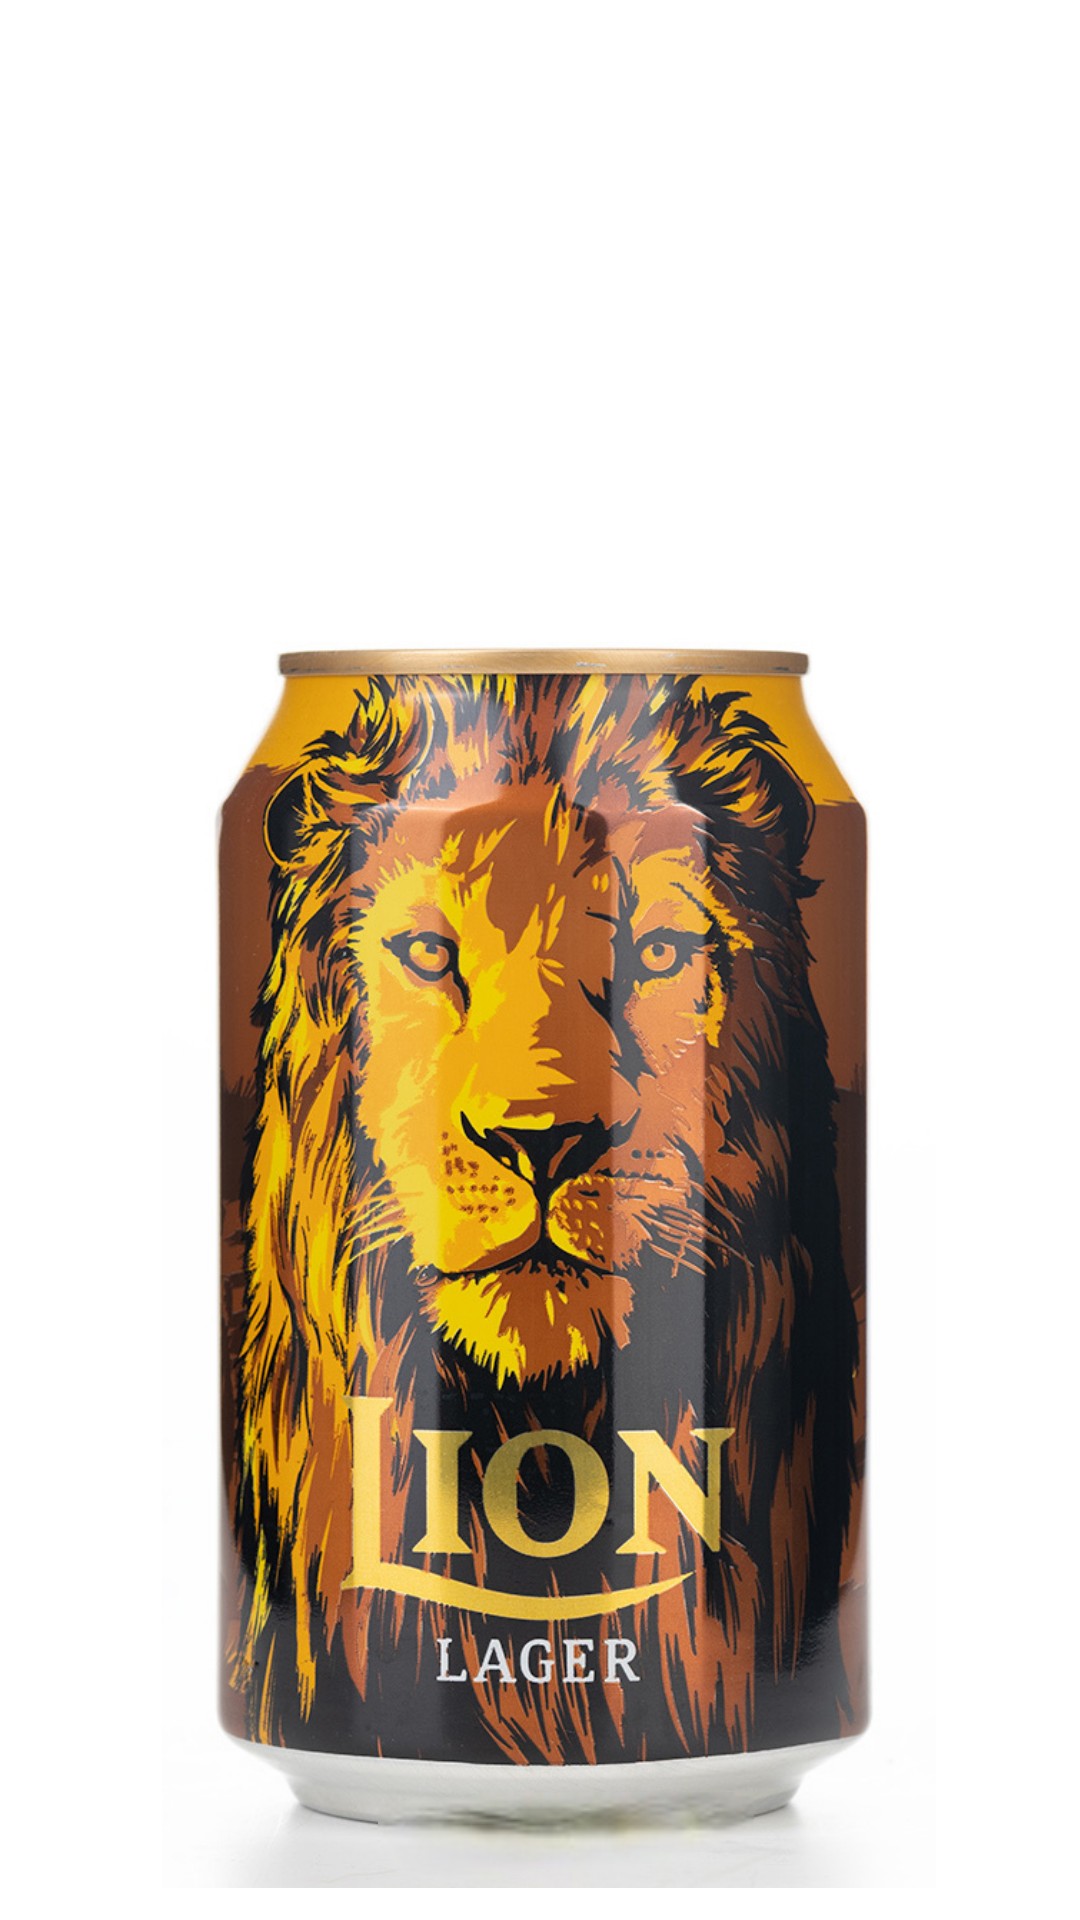 LION-LAGER-BEER-330ML-CAN-1 (2)